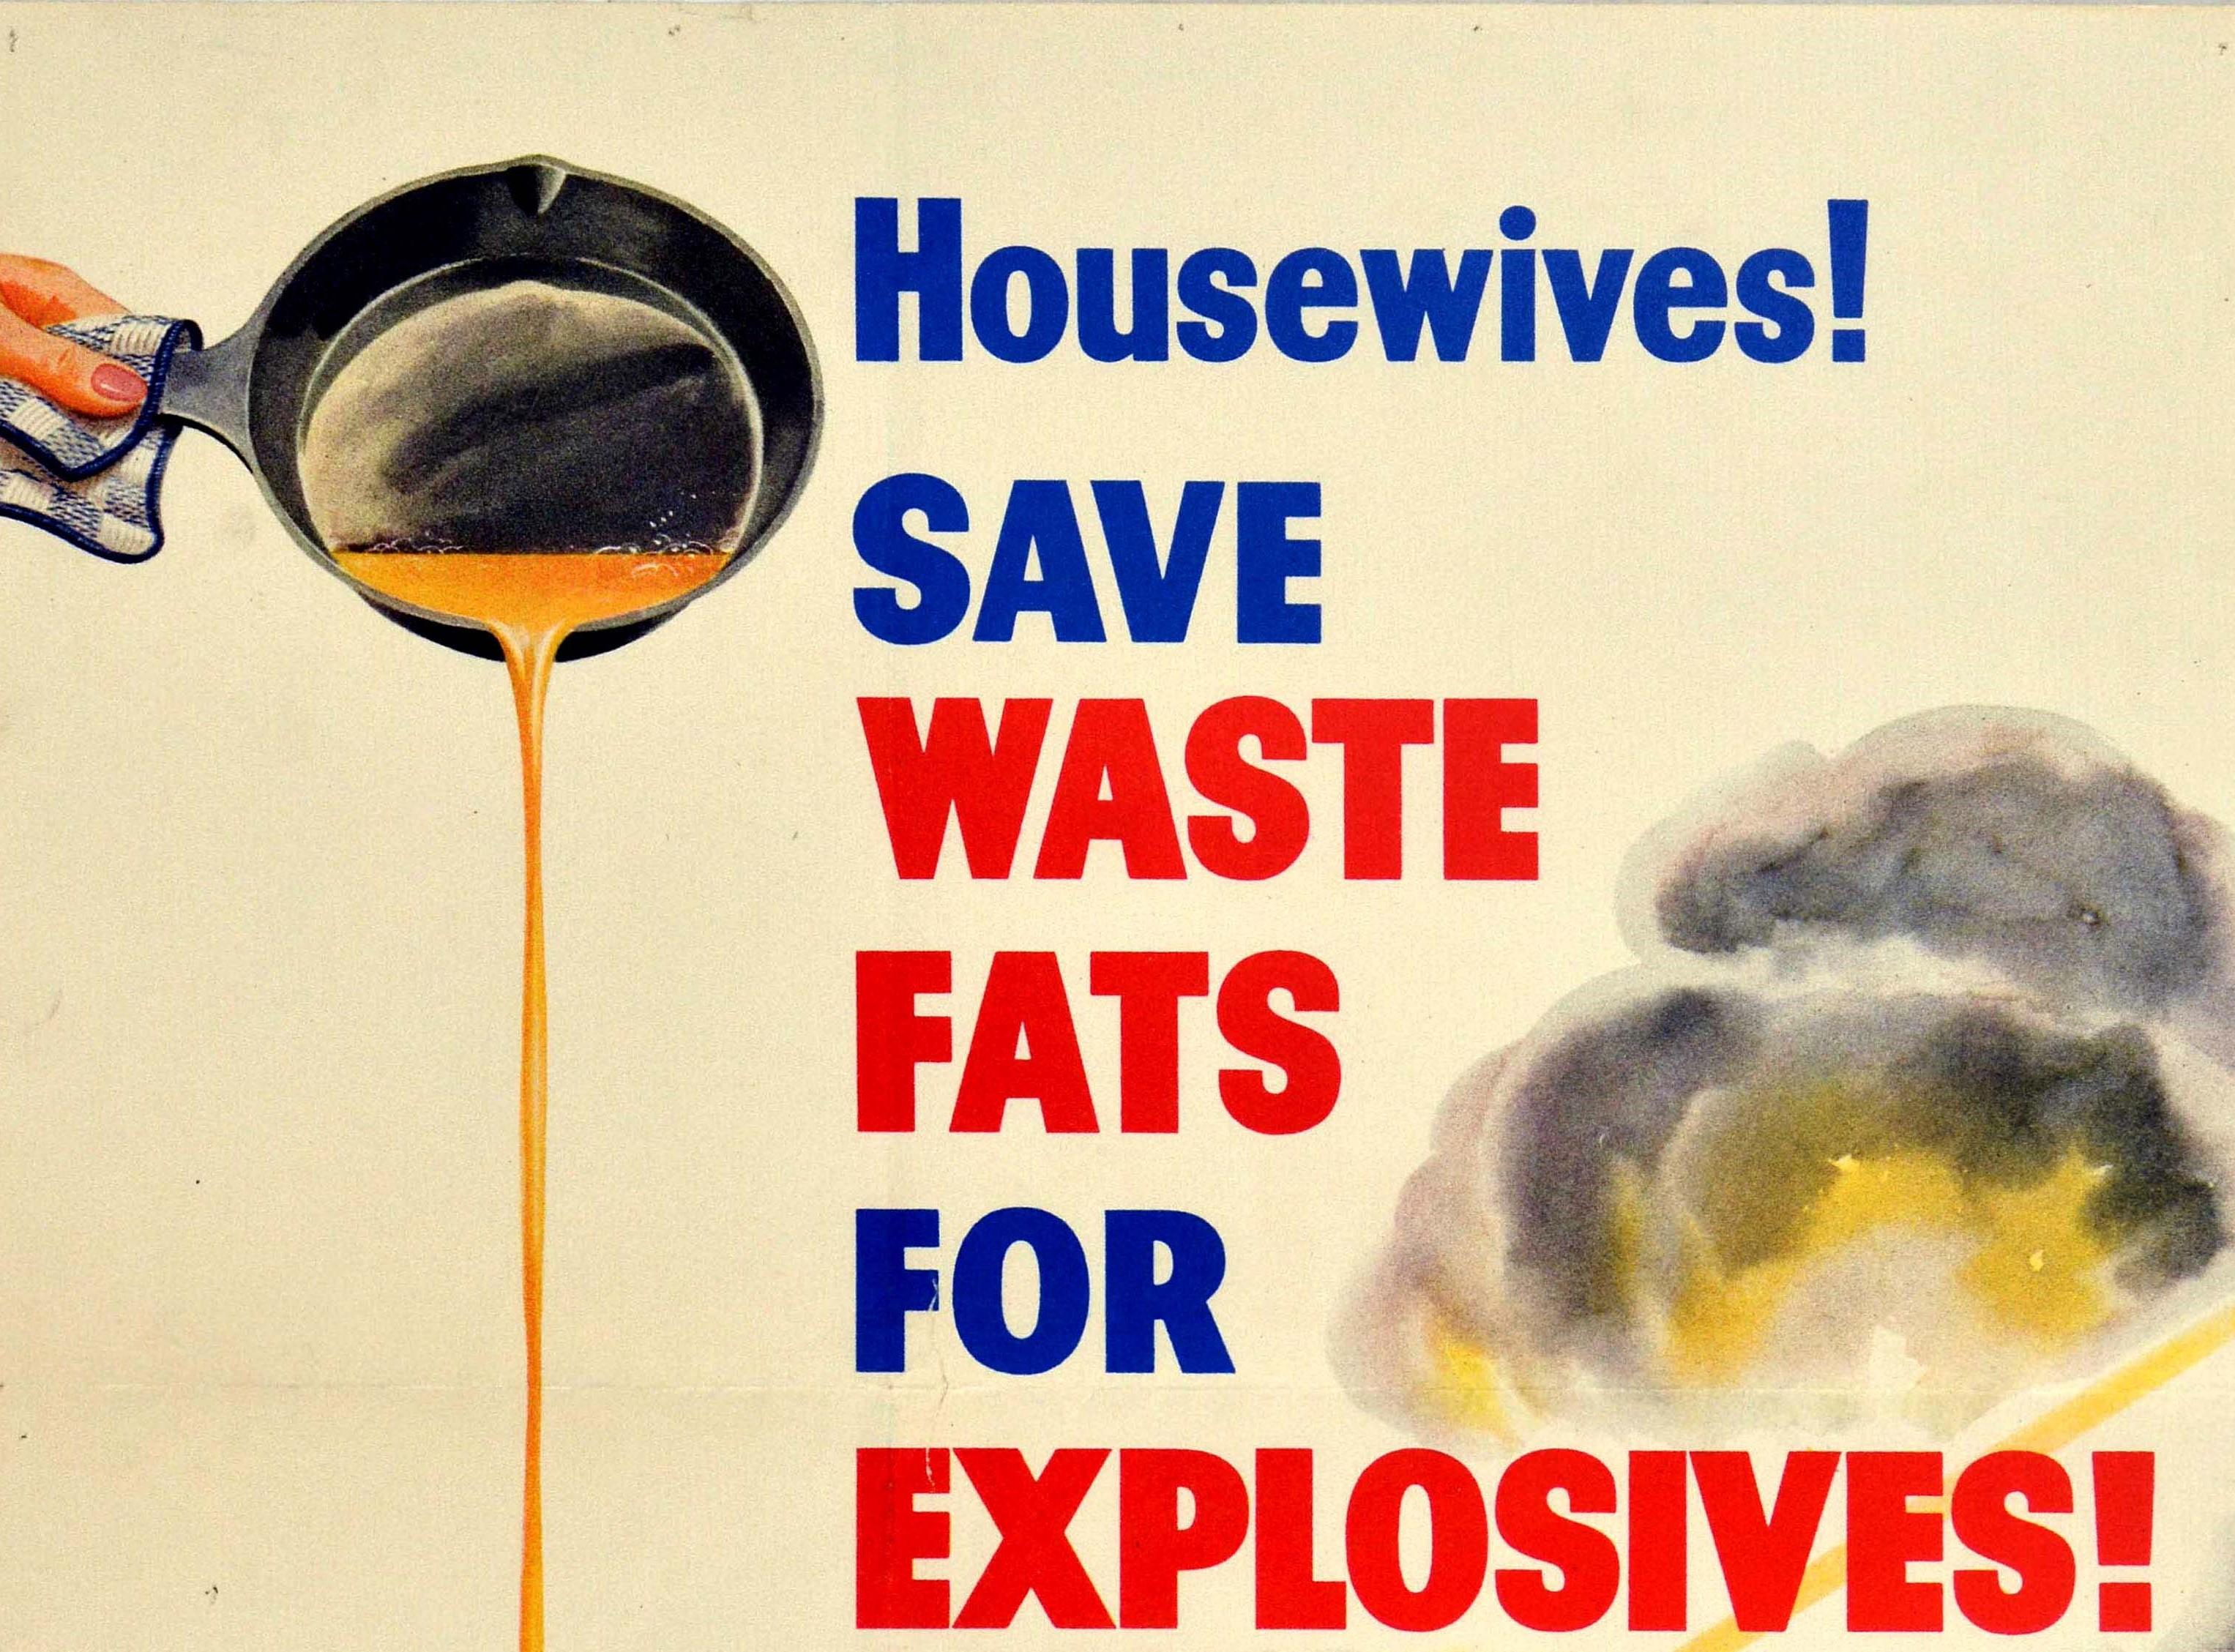 Original Vintage Poster Housewives Save Waste Fats For Explosives WWII War Army - Print by Walter Richards